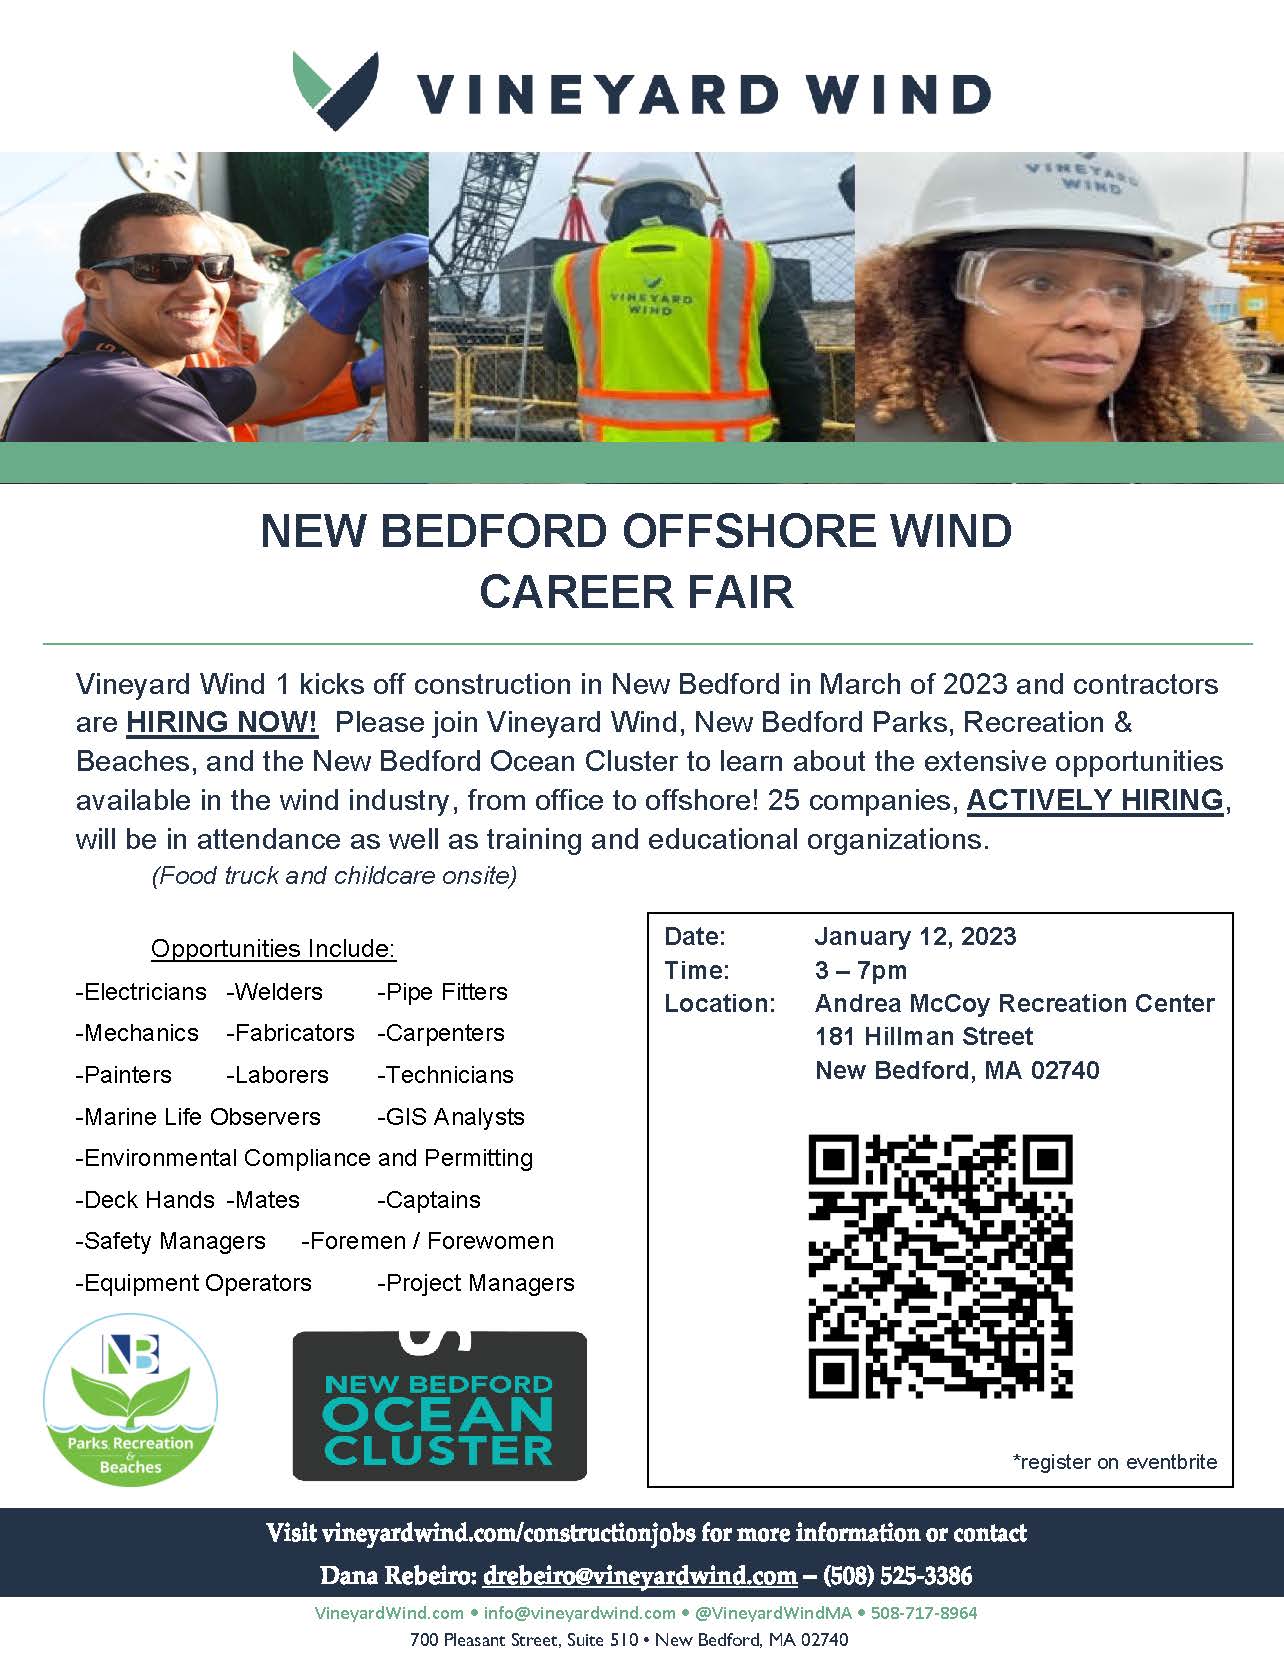 New Bedford Offshore Wind Career Fair